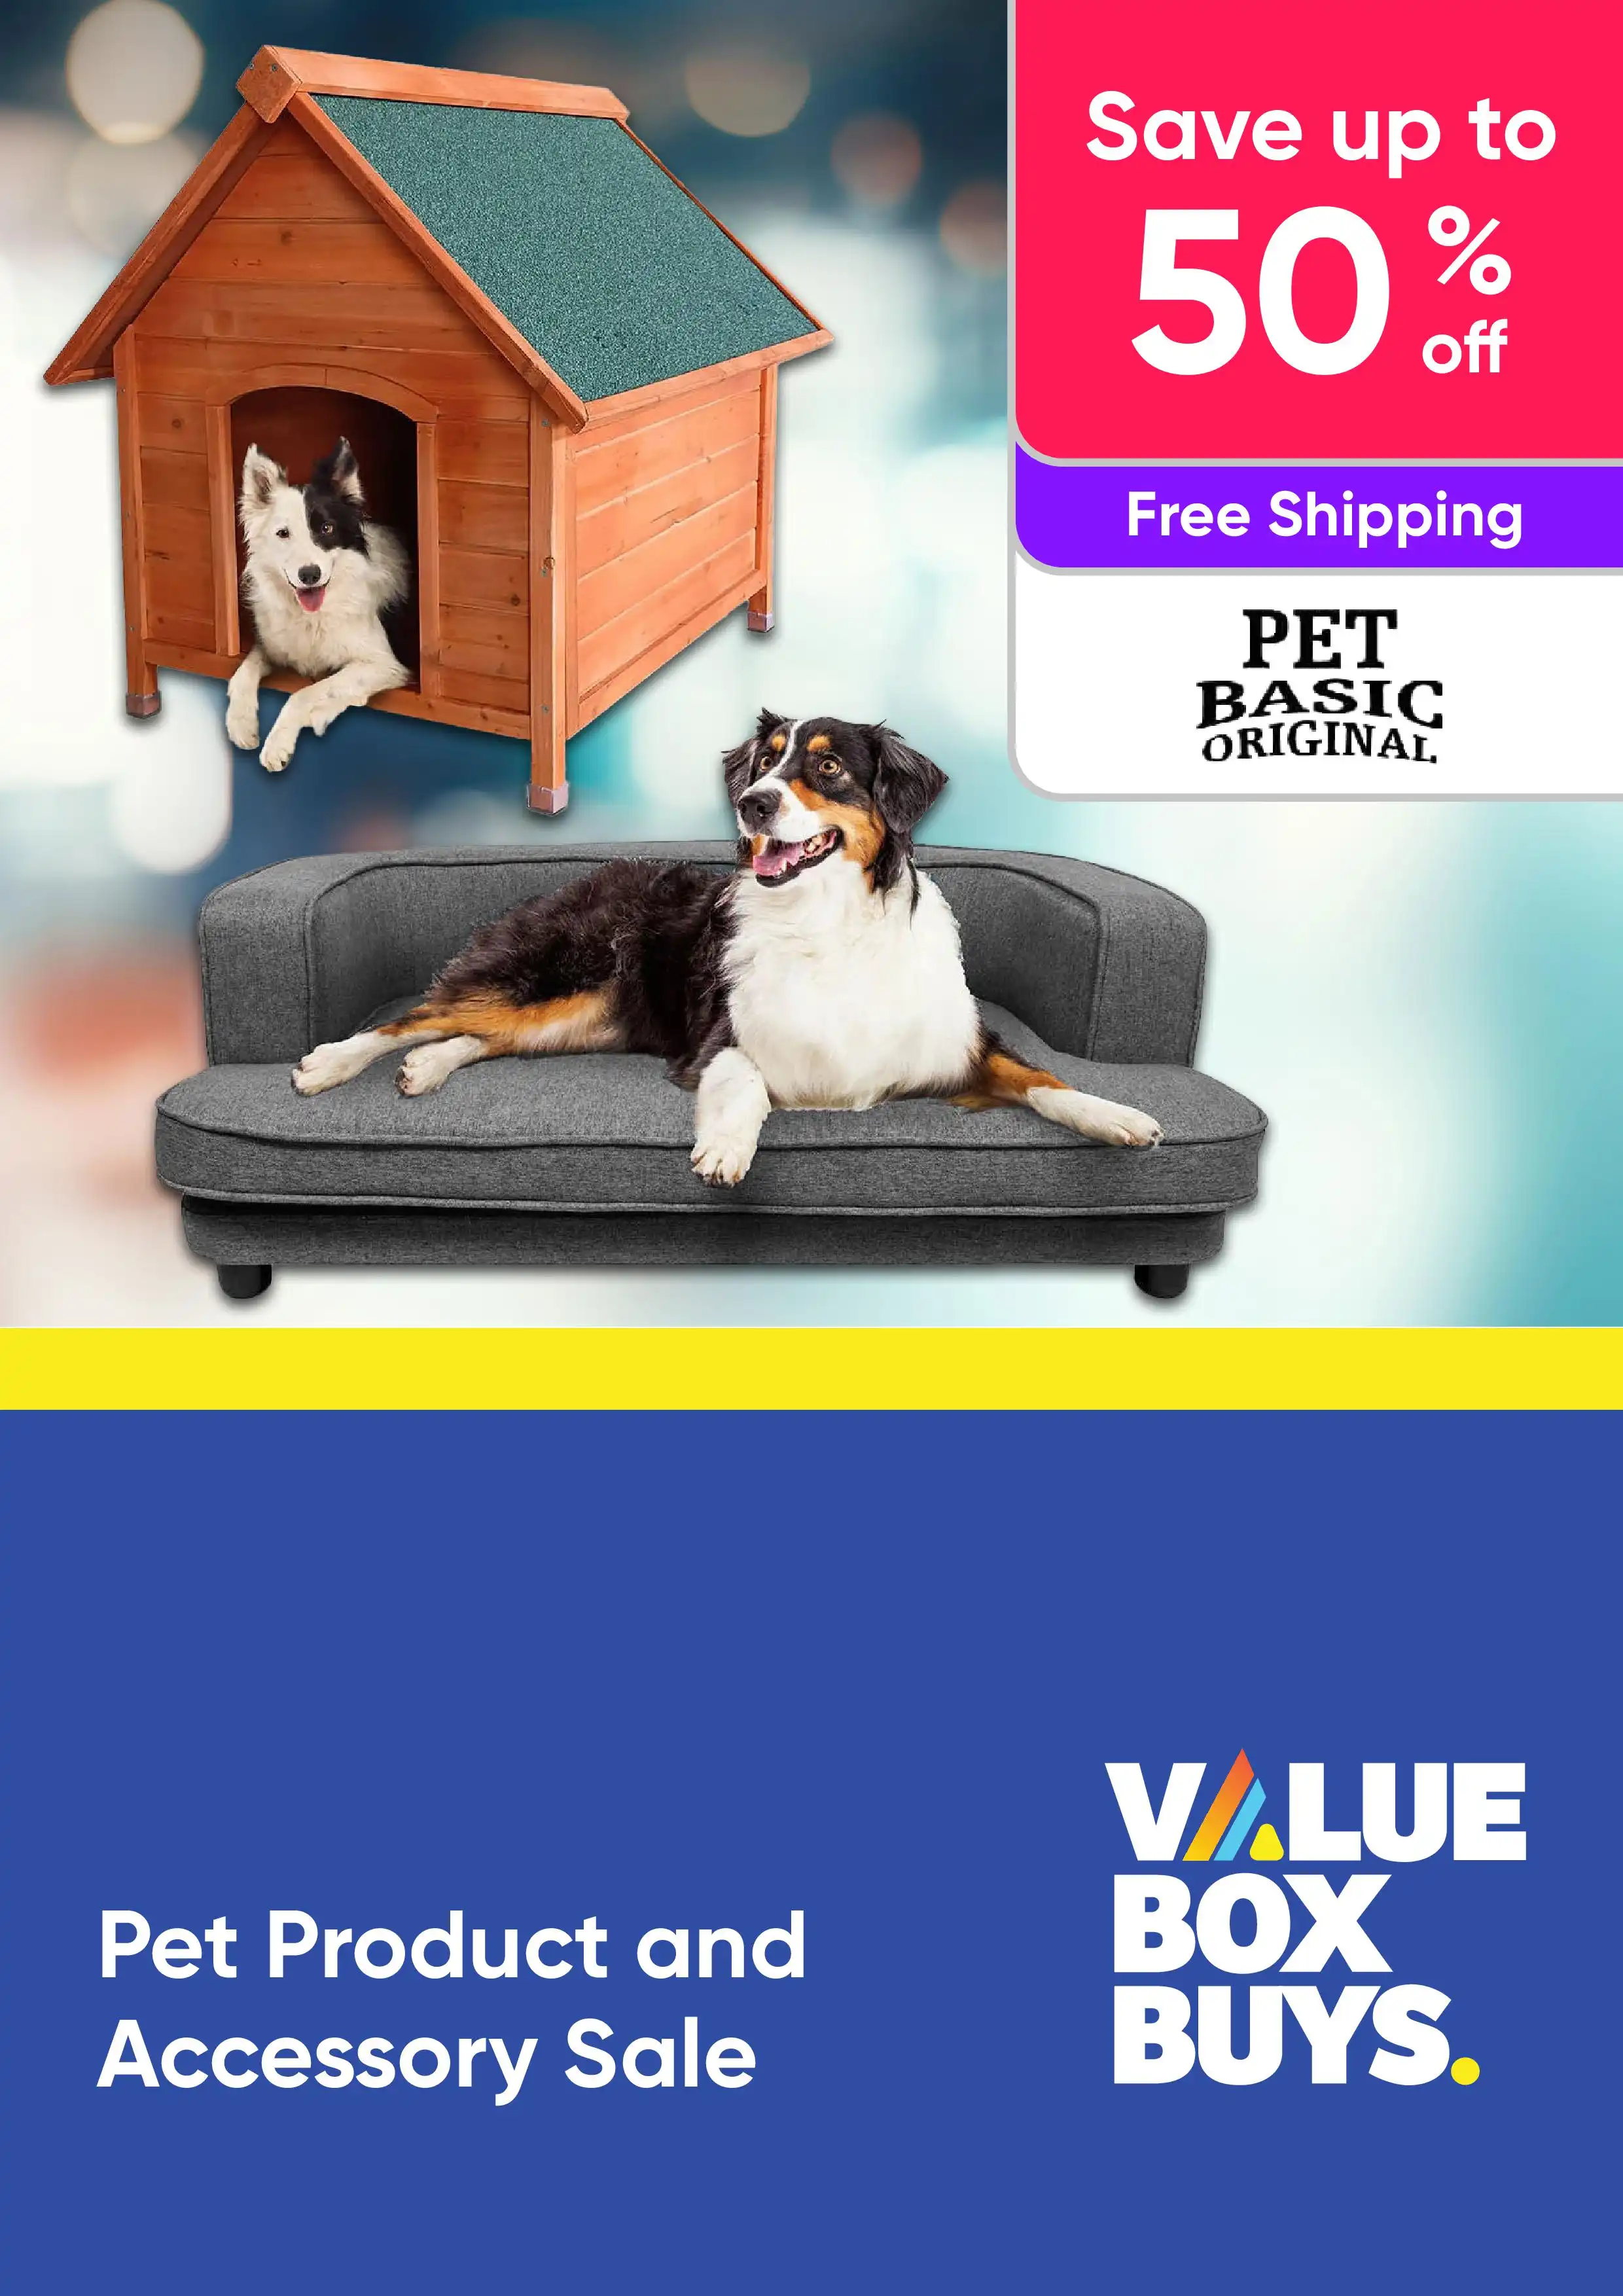 Pet Product and Accessory Sale - Up to 50% off